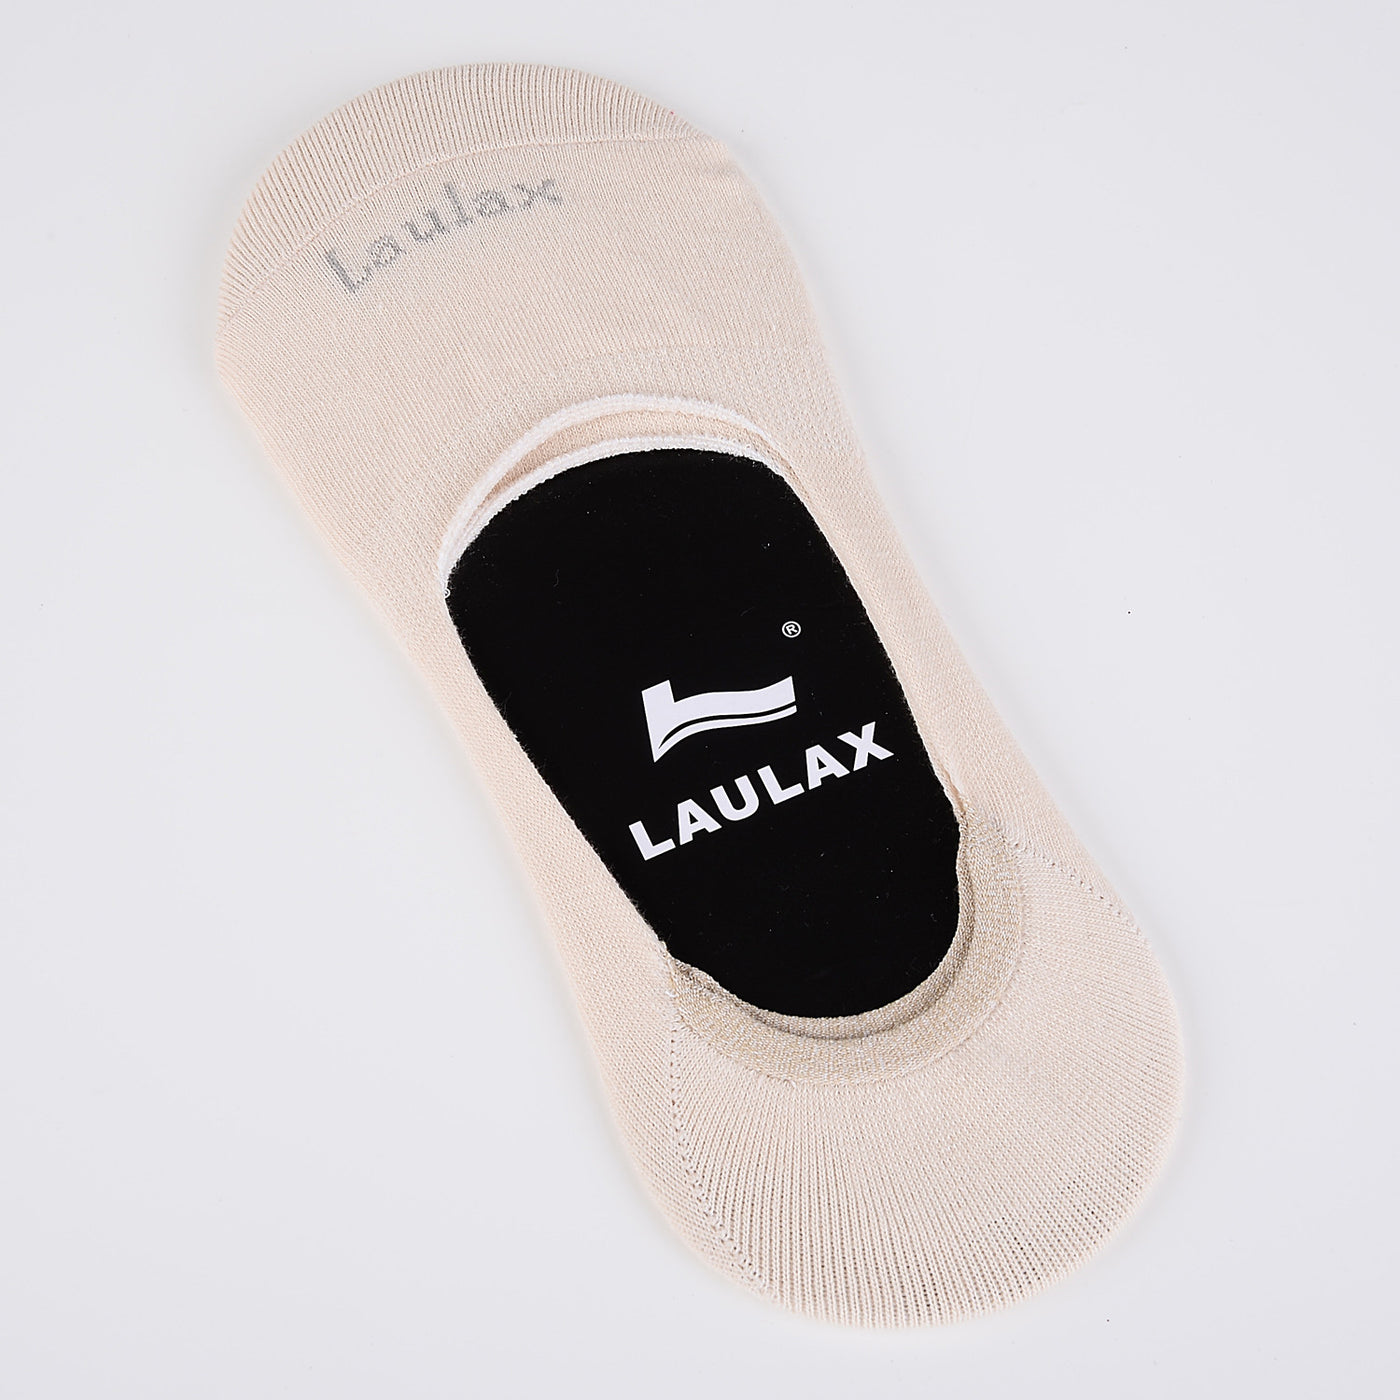 Laulax 2 Pairs Finest Combed Cotton Invisible Socks Plain - Beige